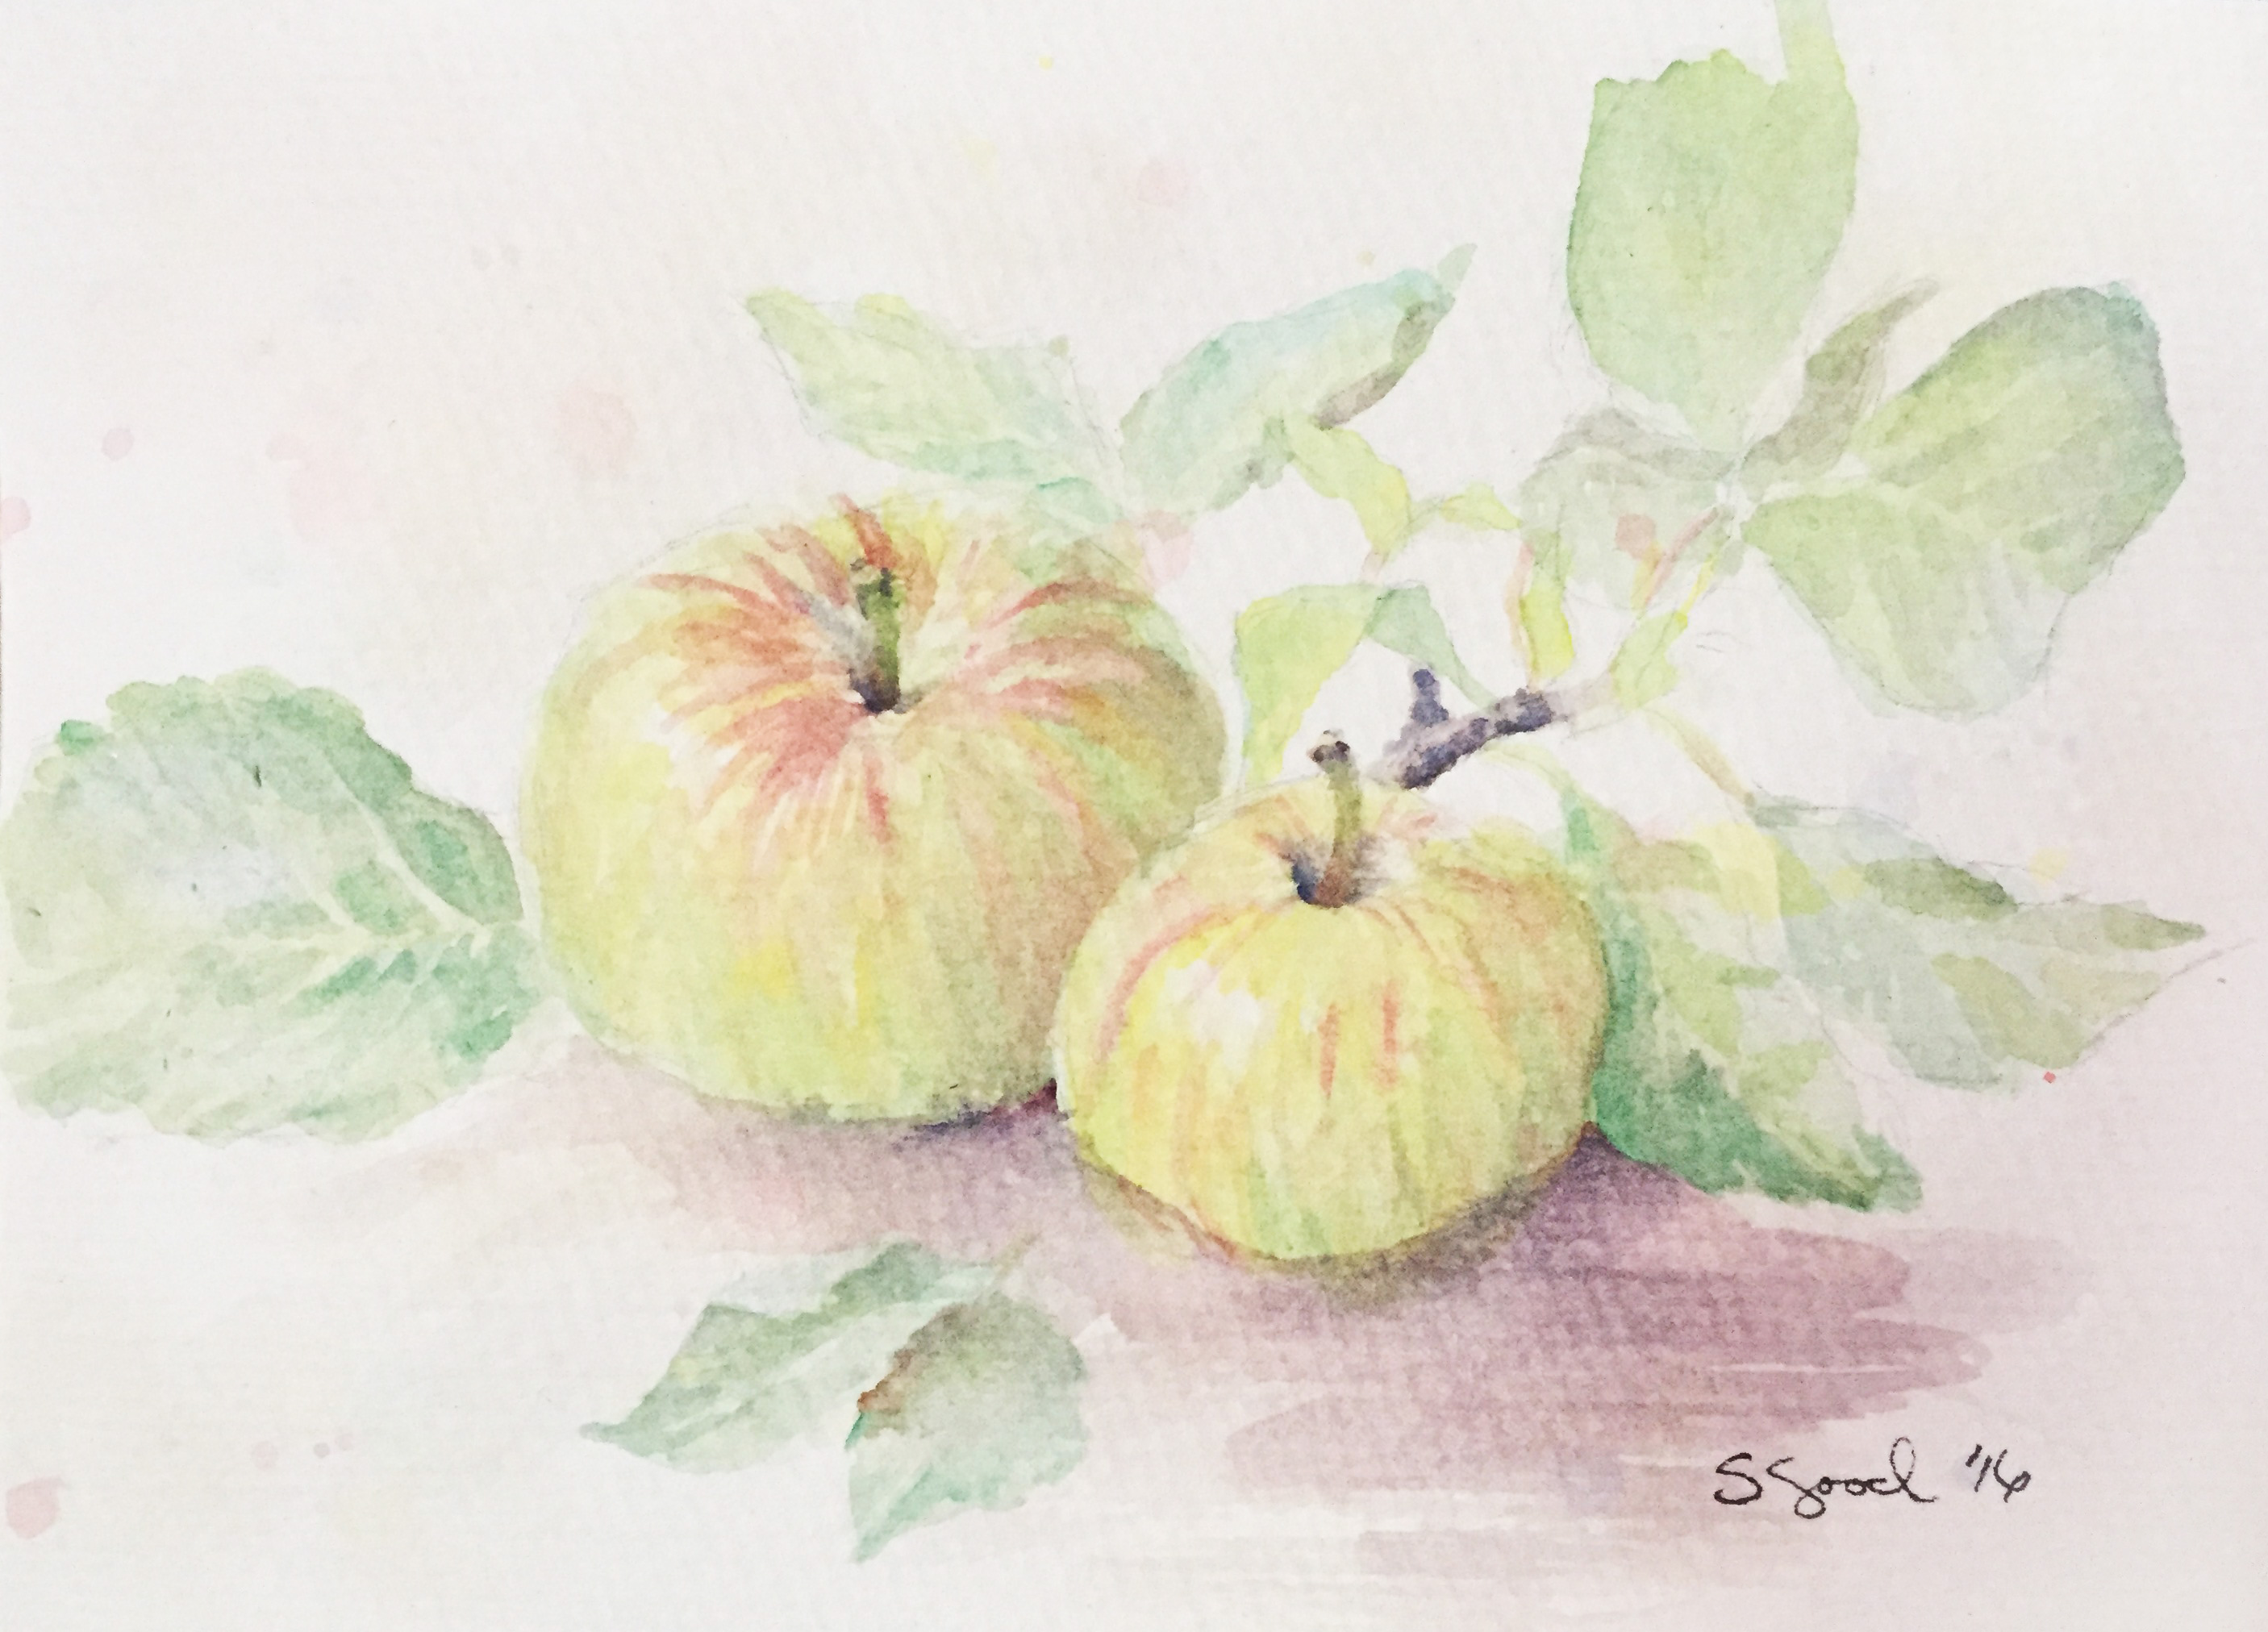 Apples | Private Collection